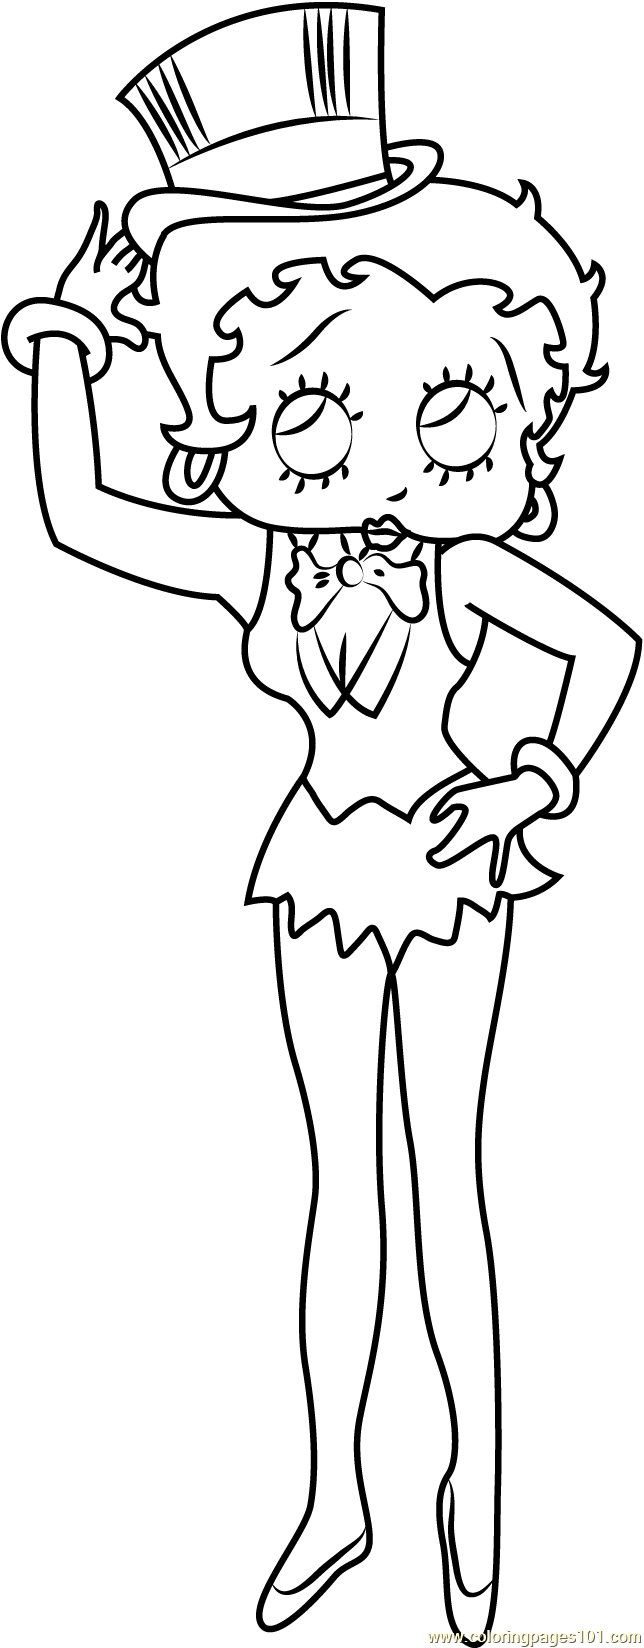 Betty Boop Independace day Coloring Page for Kids - Free Betty Boop